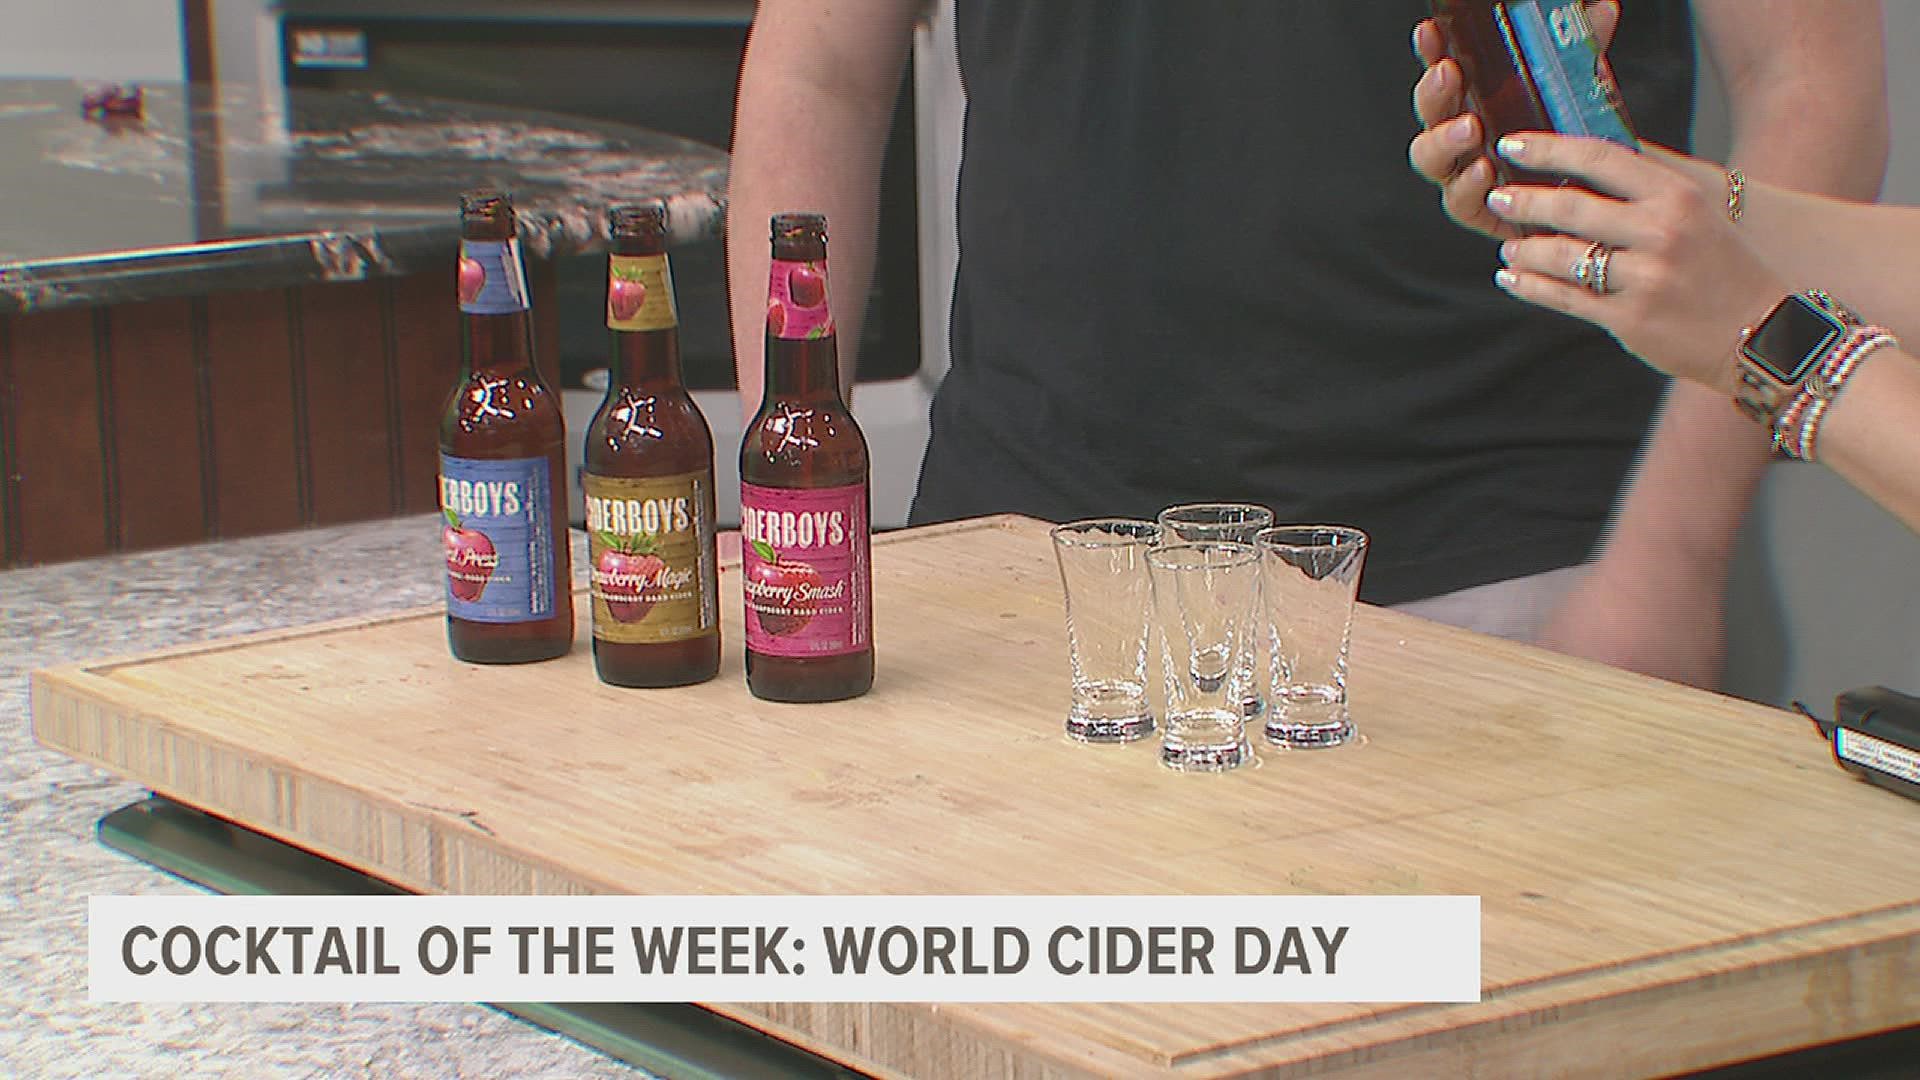 To celebrate World Cider Day, News 8's Jillian Mahen had a cider tasting with Matt King from Pour Bros. Craft Taproom.